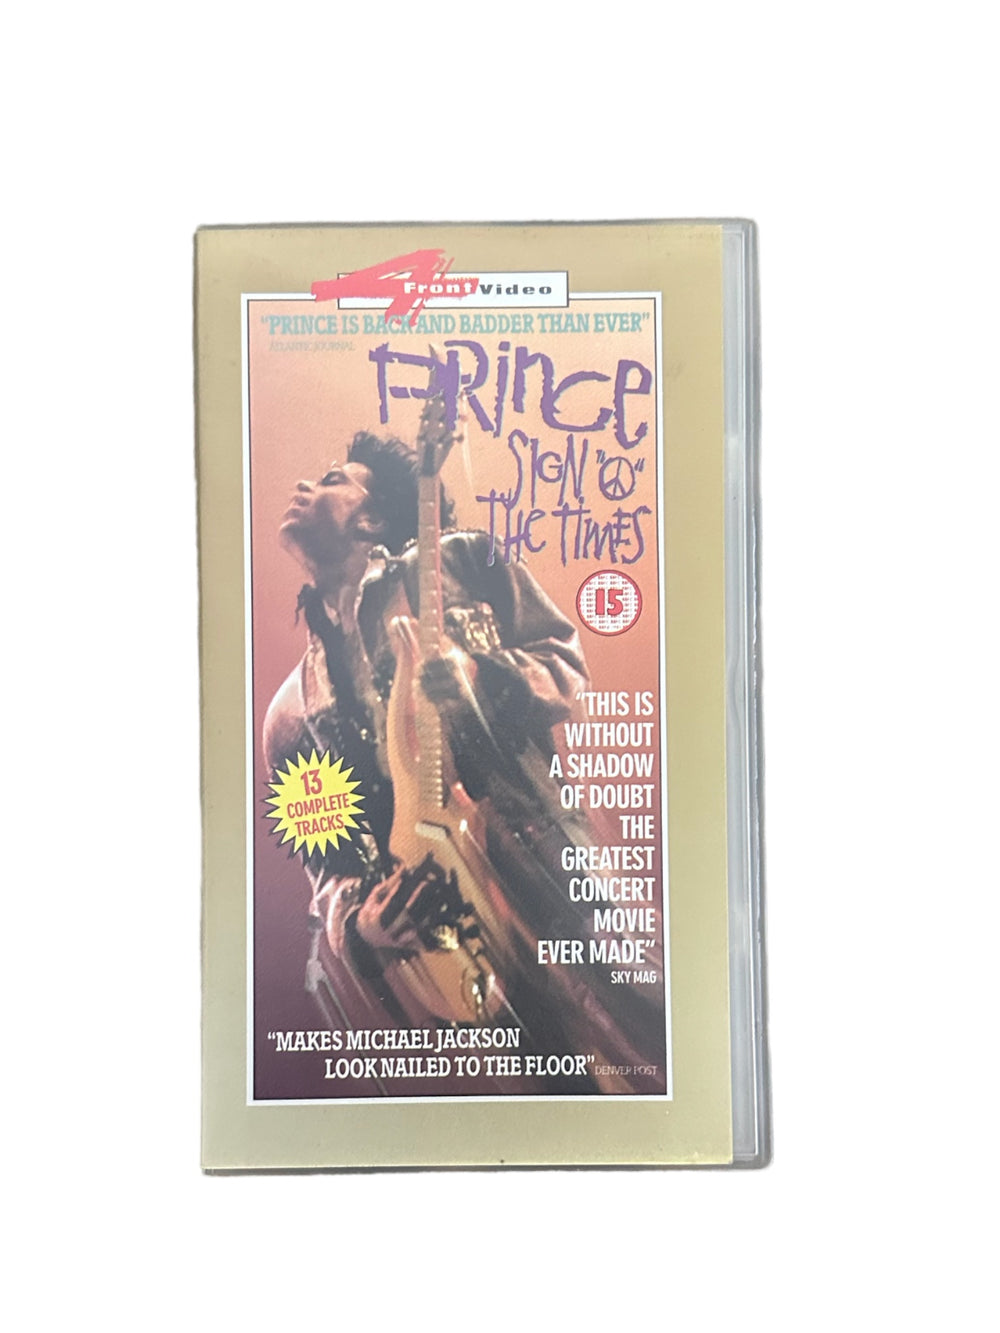 Prince – Sign O The Times VHS Video Cassette Reissue PAL Preloved: 1992